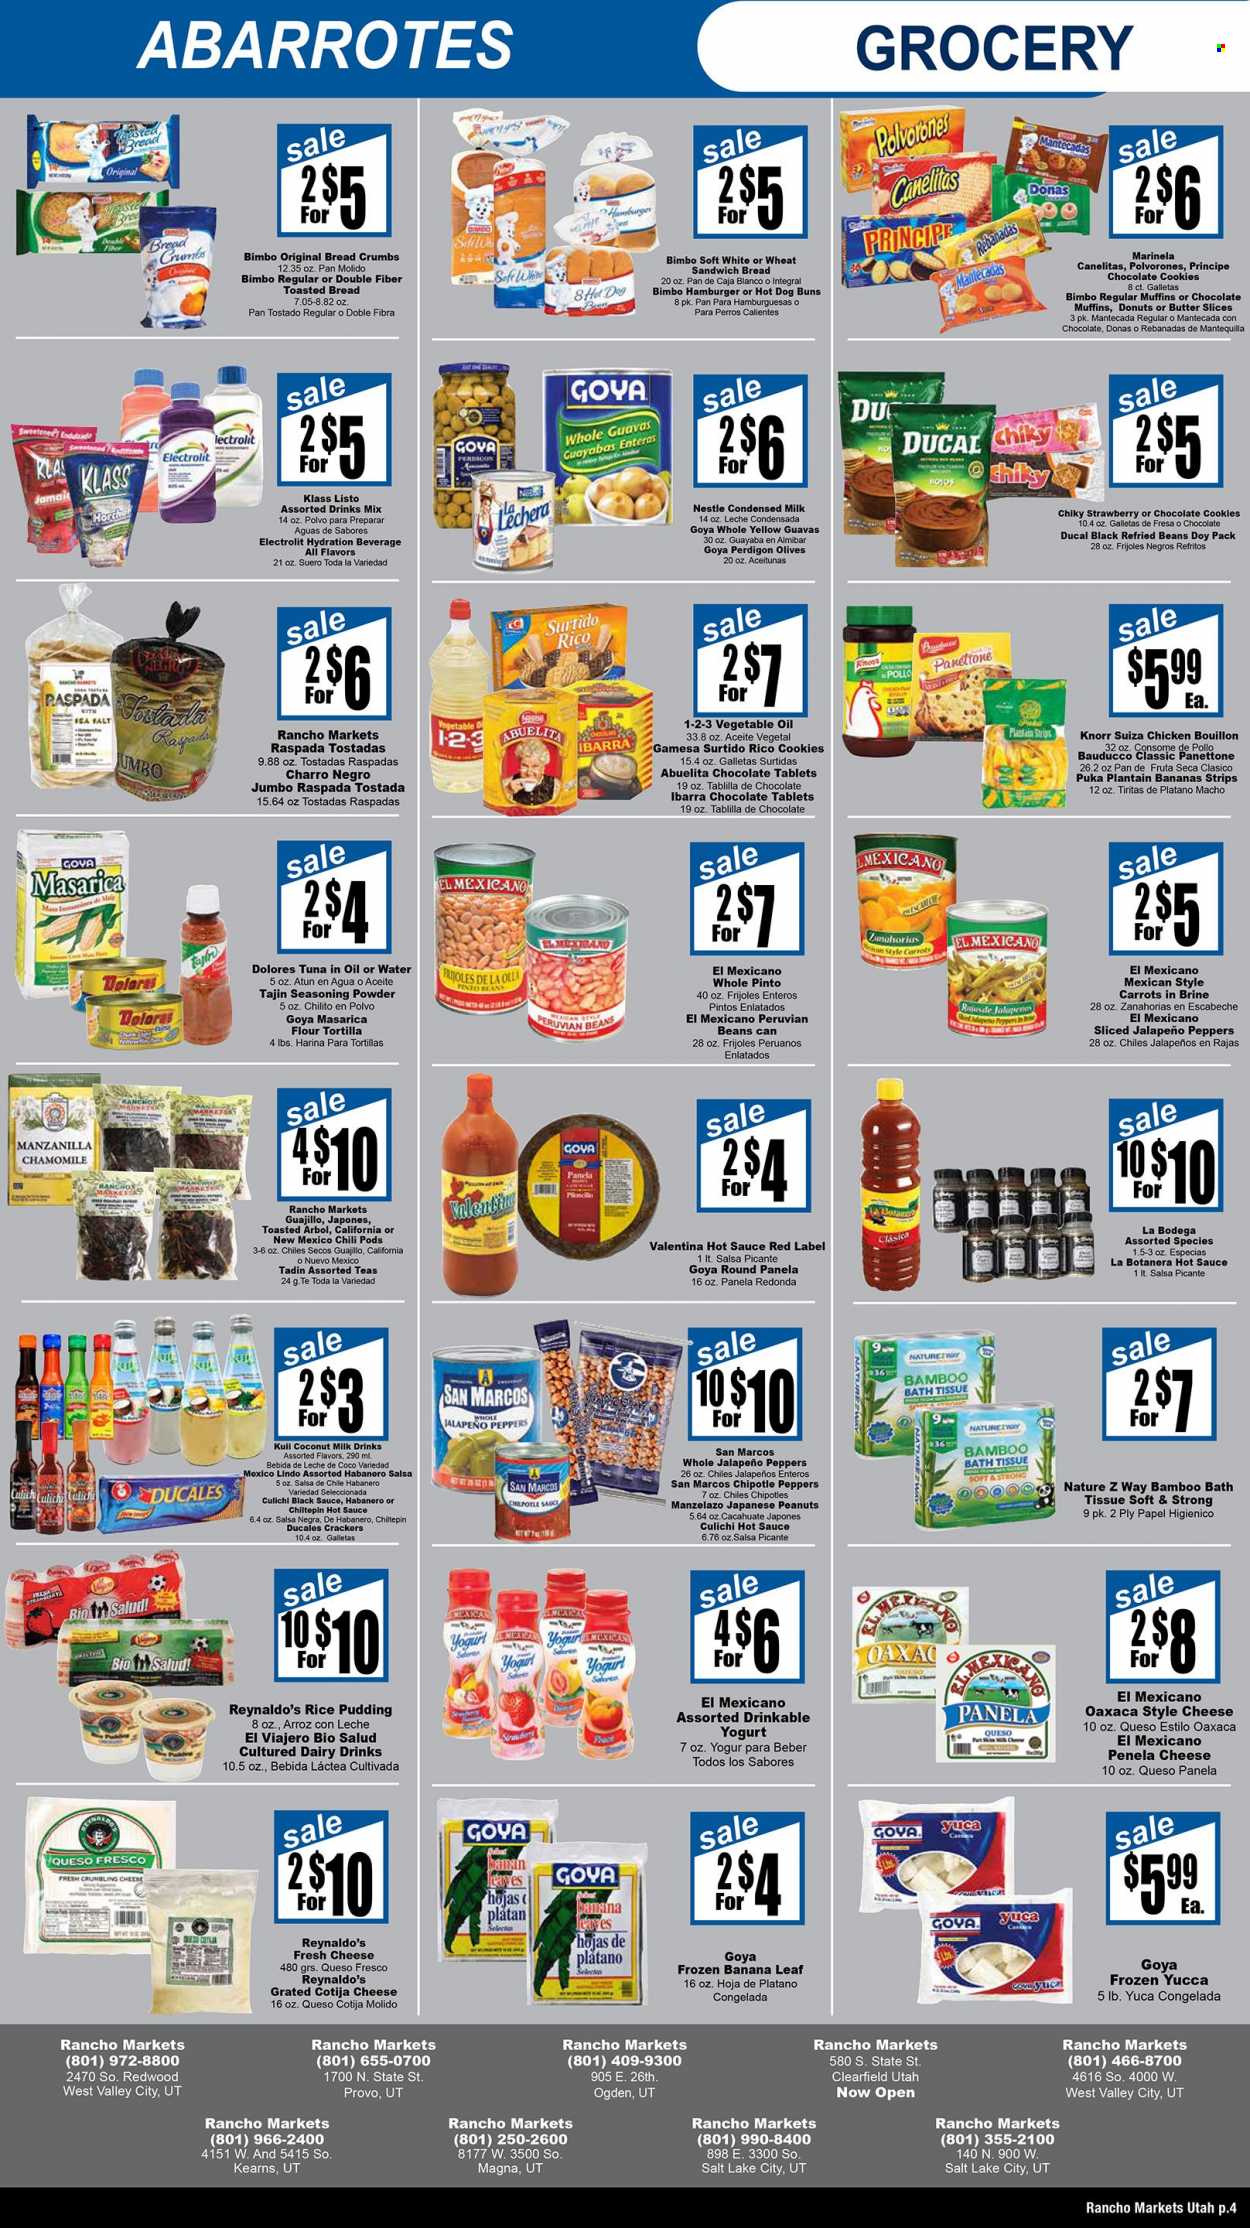 thumbnail - Rancho Markets Flyer - 11/29/2022 - 12/05/2022 - Sales products - tortillas, buns, tostadas, panettone, donut, muffin, breadcrumbs, beans, carrots, jalapeño, bananas, tuna, Knorr, queso fresco, cheese, yoghurt, rice pudding, condensed milk, butter, strips, cookies, Nestlé, chocolate, chocolate cookies, crackers, bouillon, coconut milk, refried beans, olives, Goya, spice, hot sauce, salsa, vegetable oil, peanuts, bath tissue, pan. Page 4.